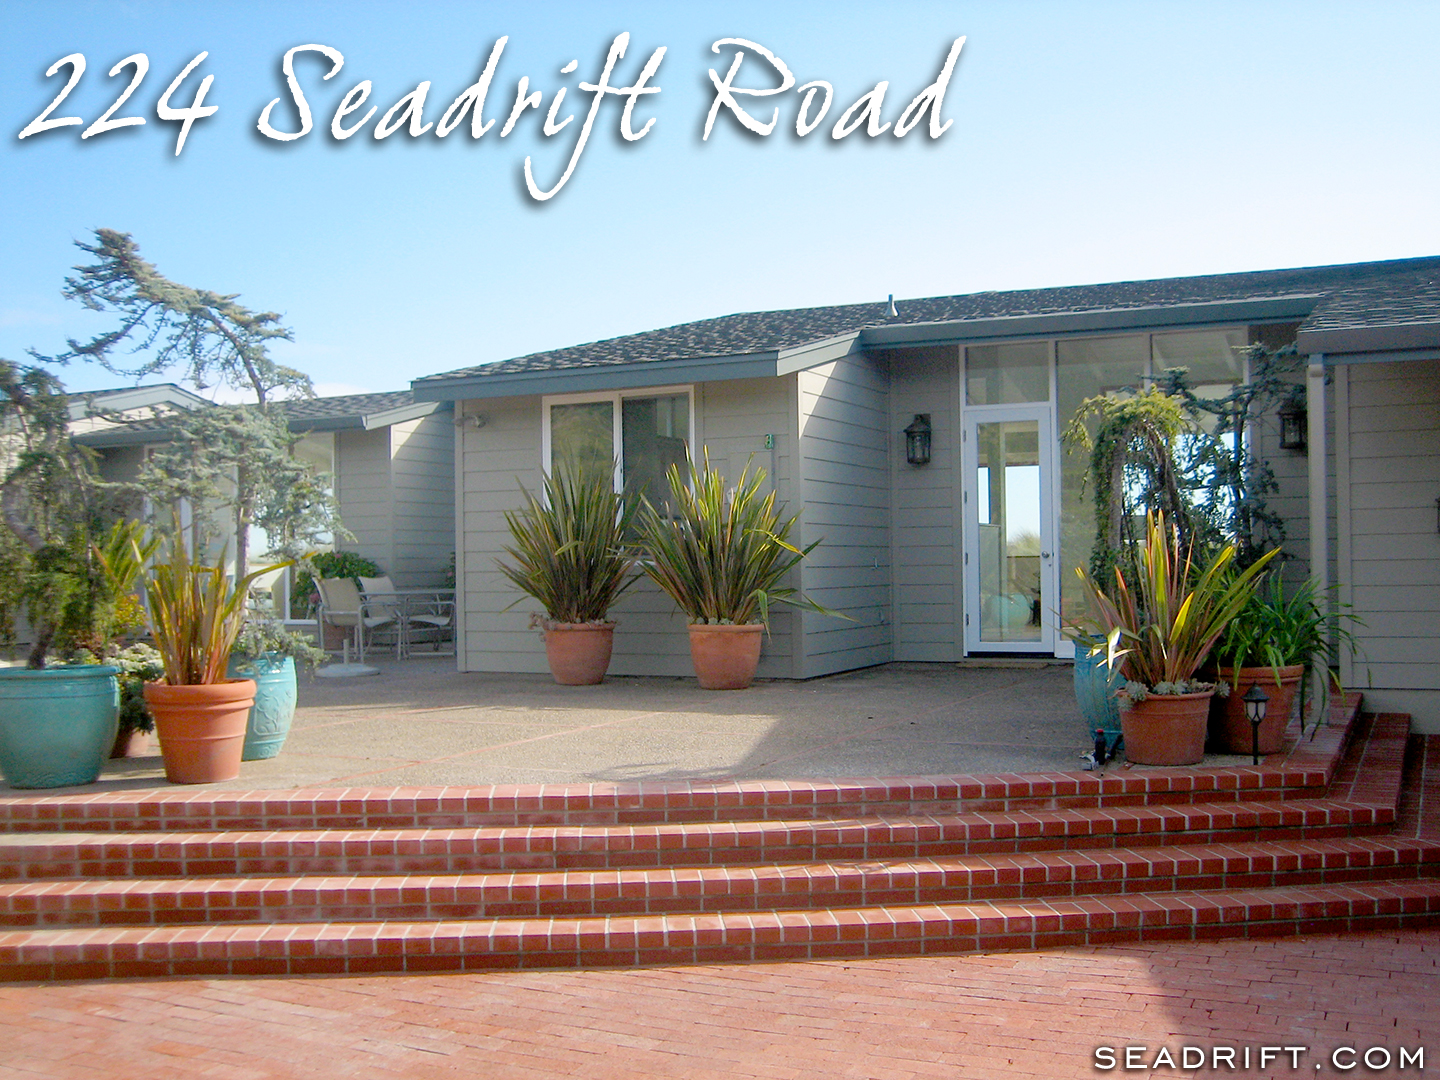 224 Seadrift Road, Stinson Beach — Inner courtyard and entrance to house